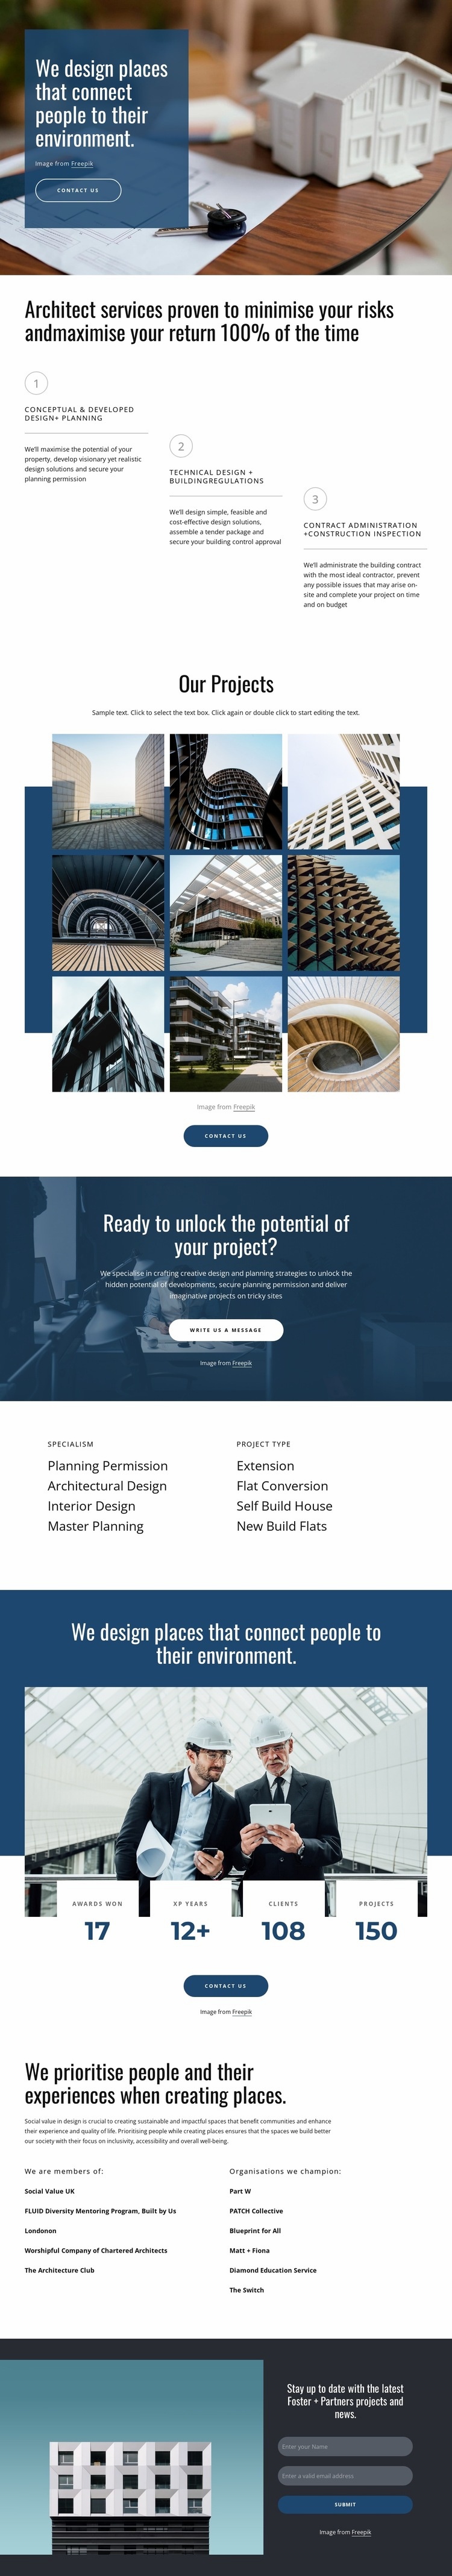 We design amazing projects Squarespace Template Alternative